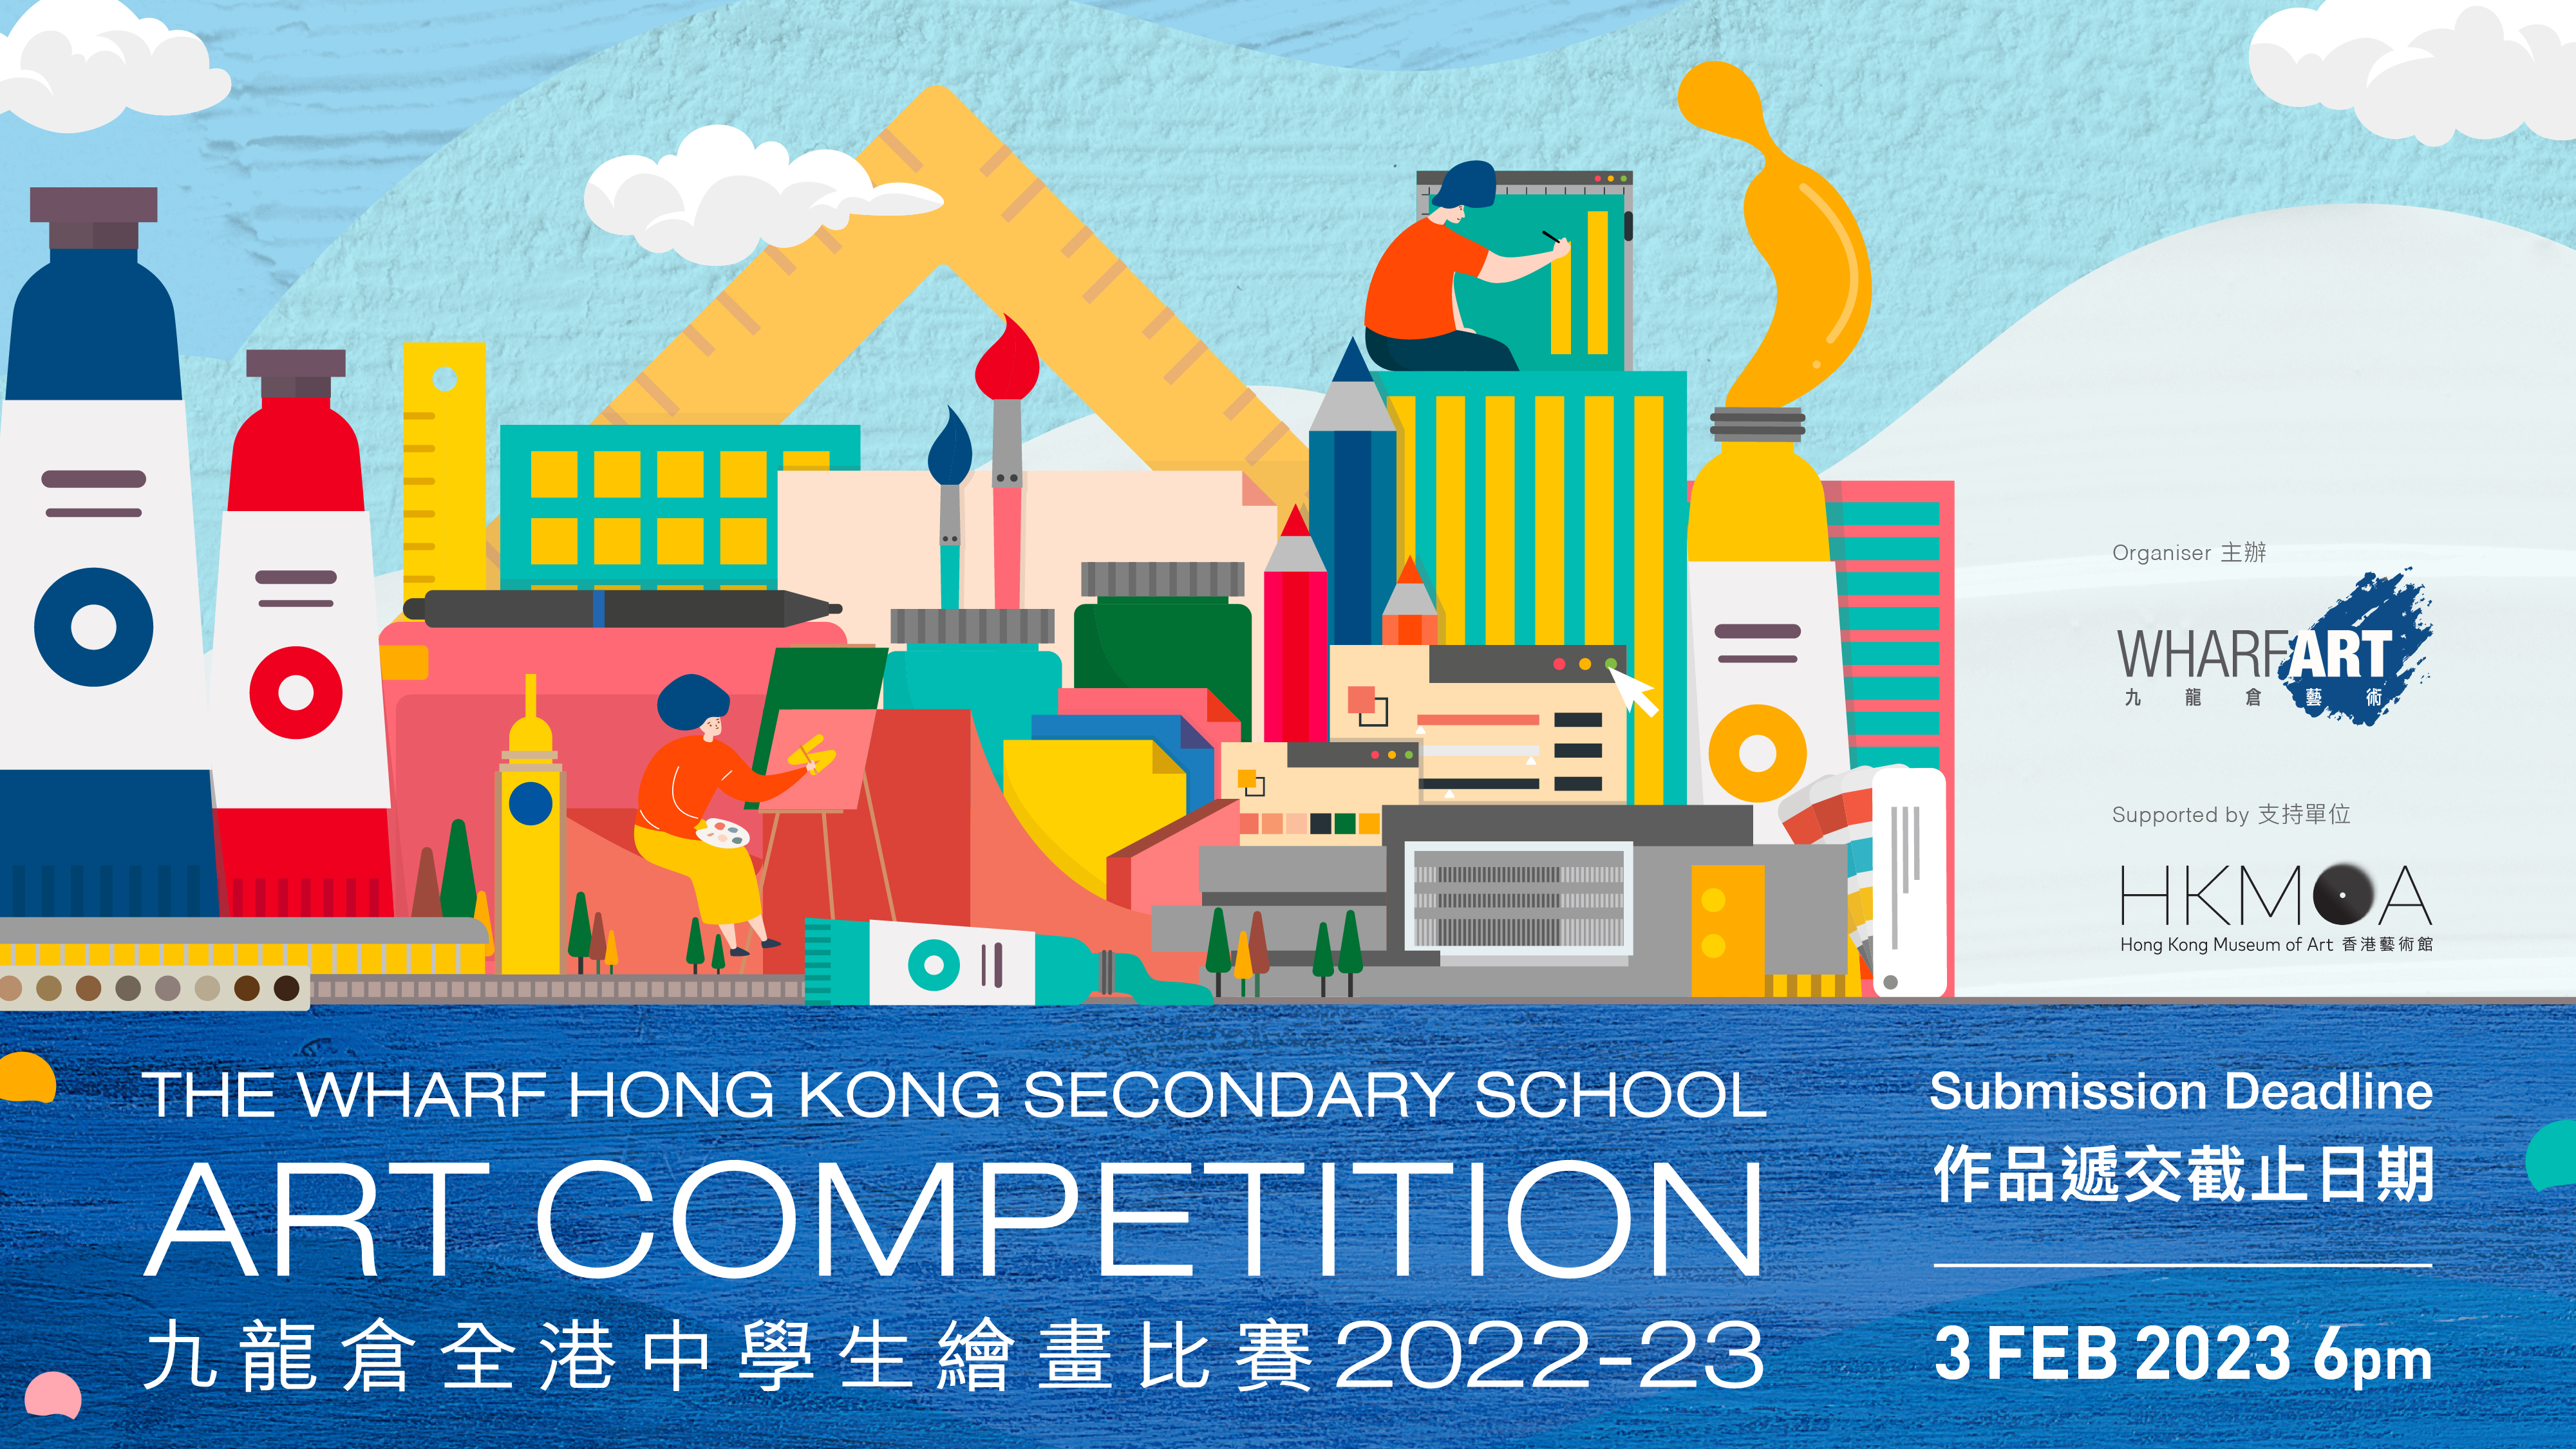 The Wharf Hong Kong Secondary School Art Competition 2022-23